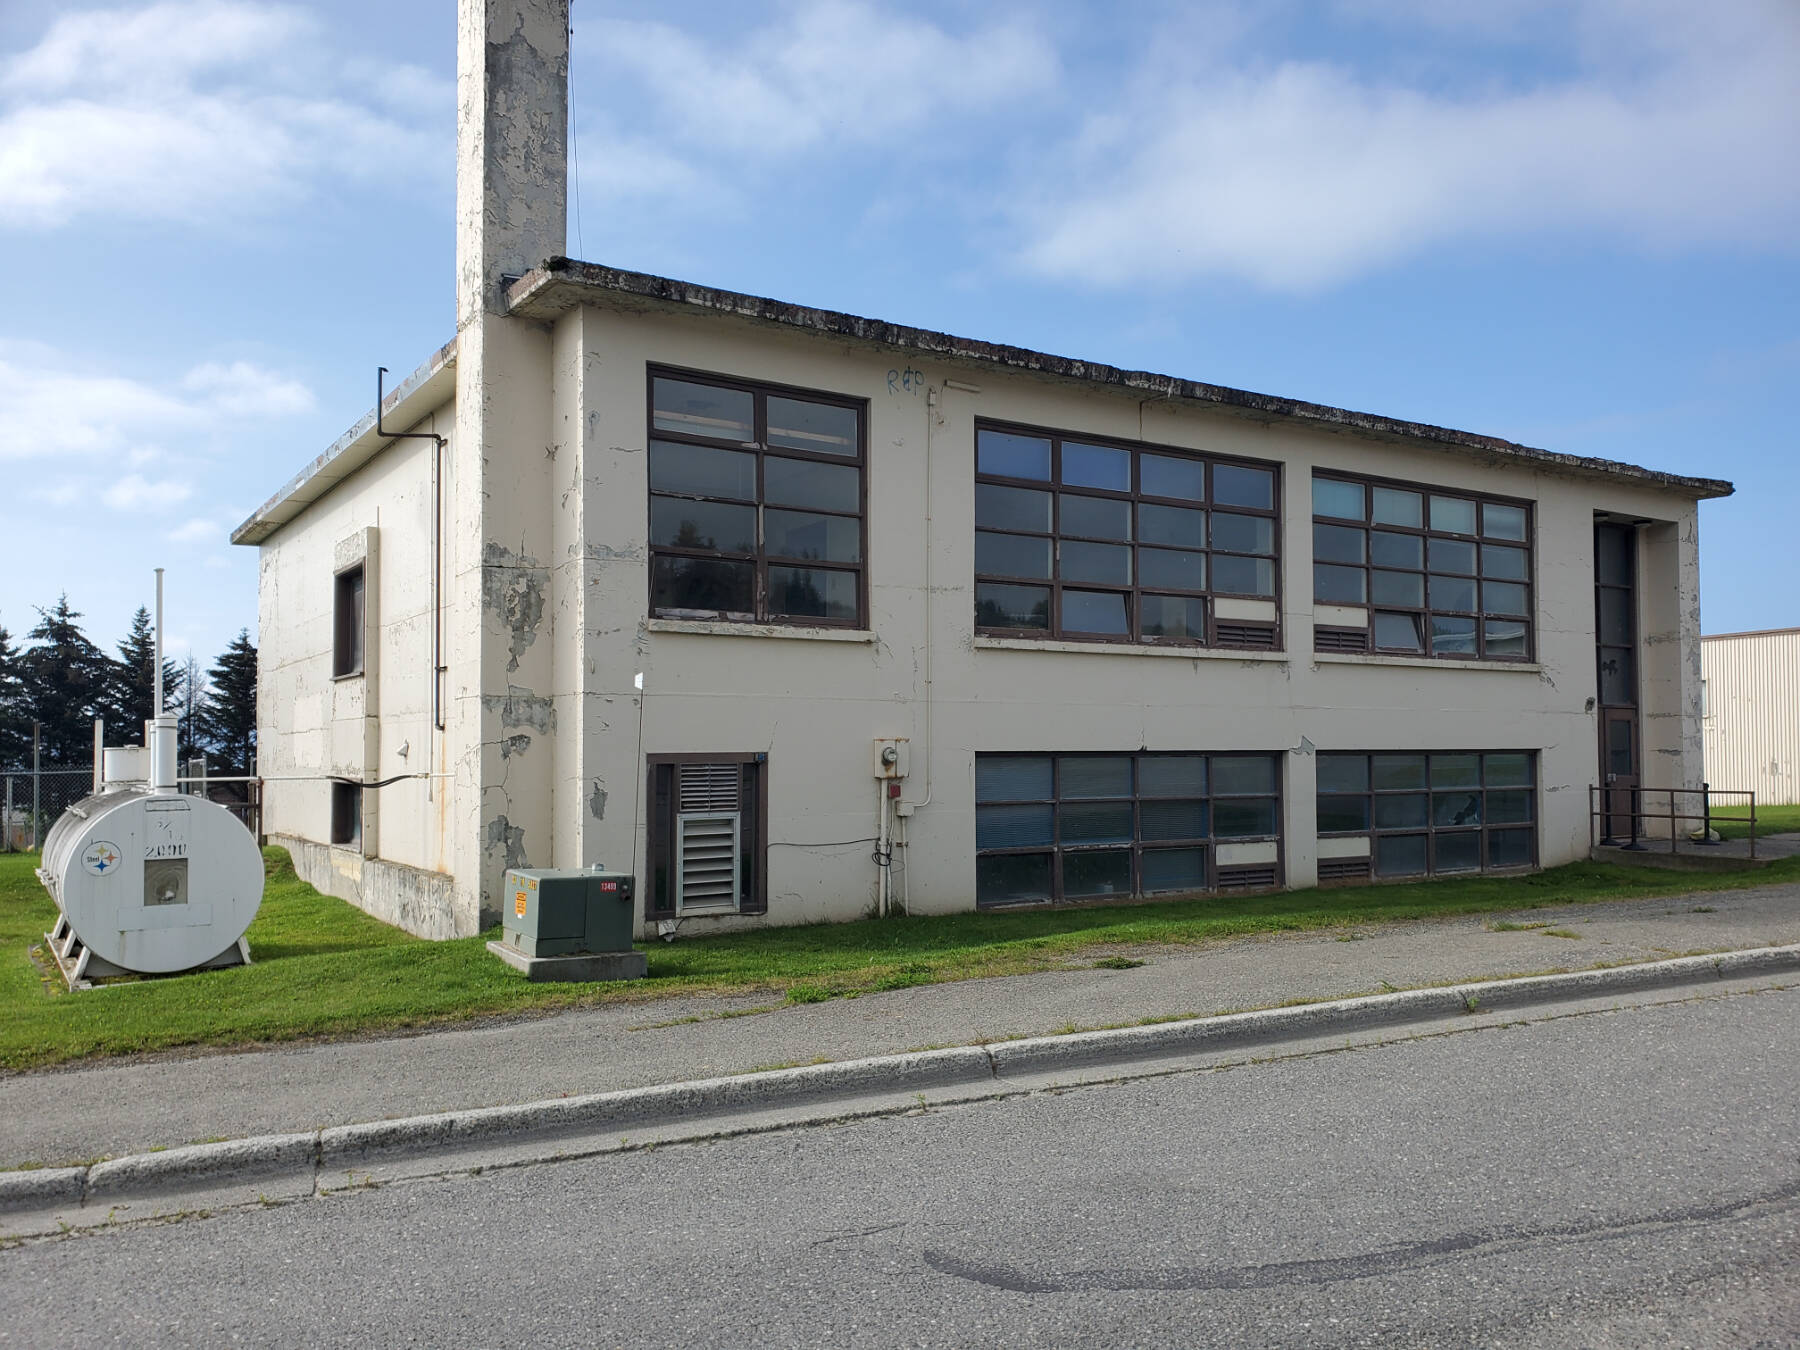 The smaller Homer Education and Recreation Center building, also called HERC 1, photographed on Friday, Aug. 18, 2023 in Homer, Alaska. (Delcenia Cosman/Homer News)